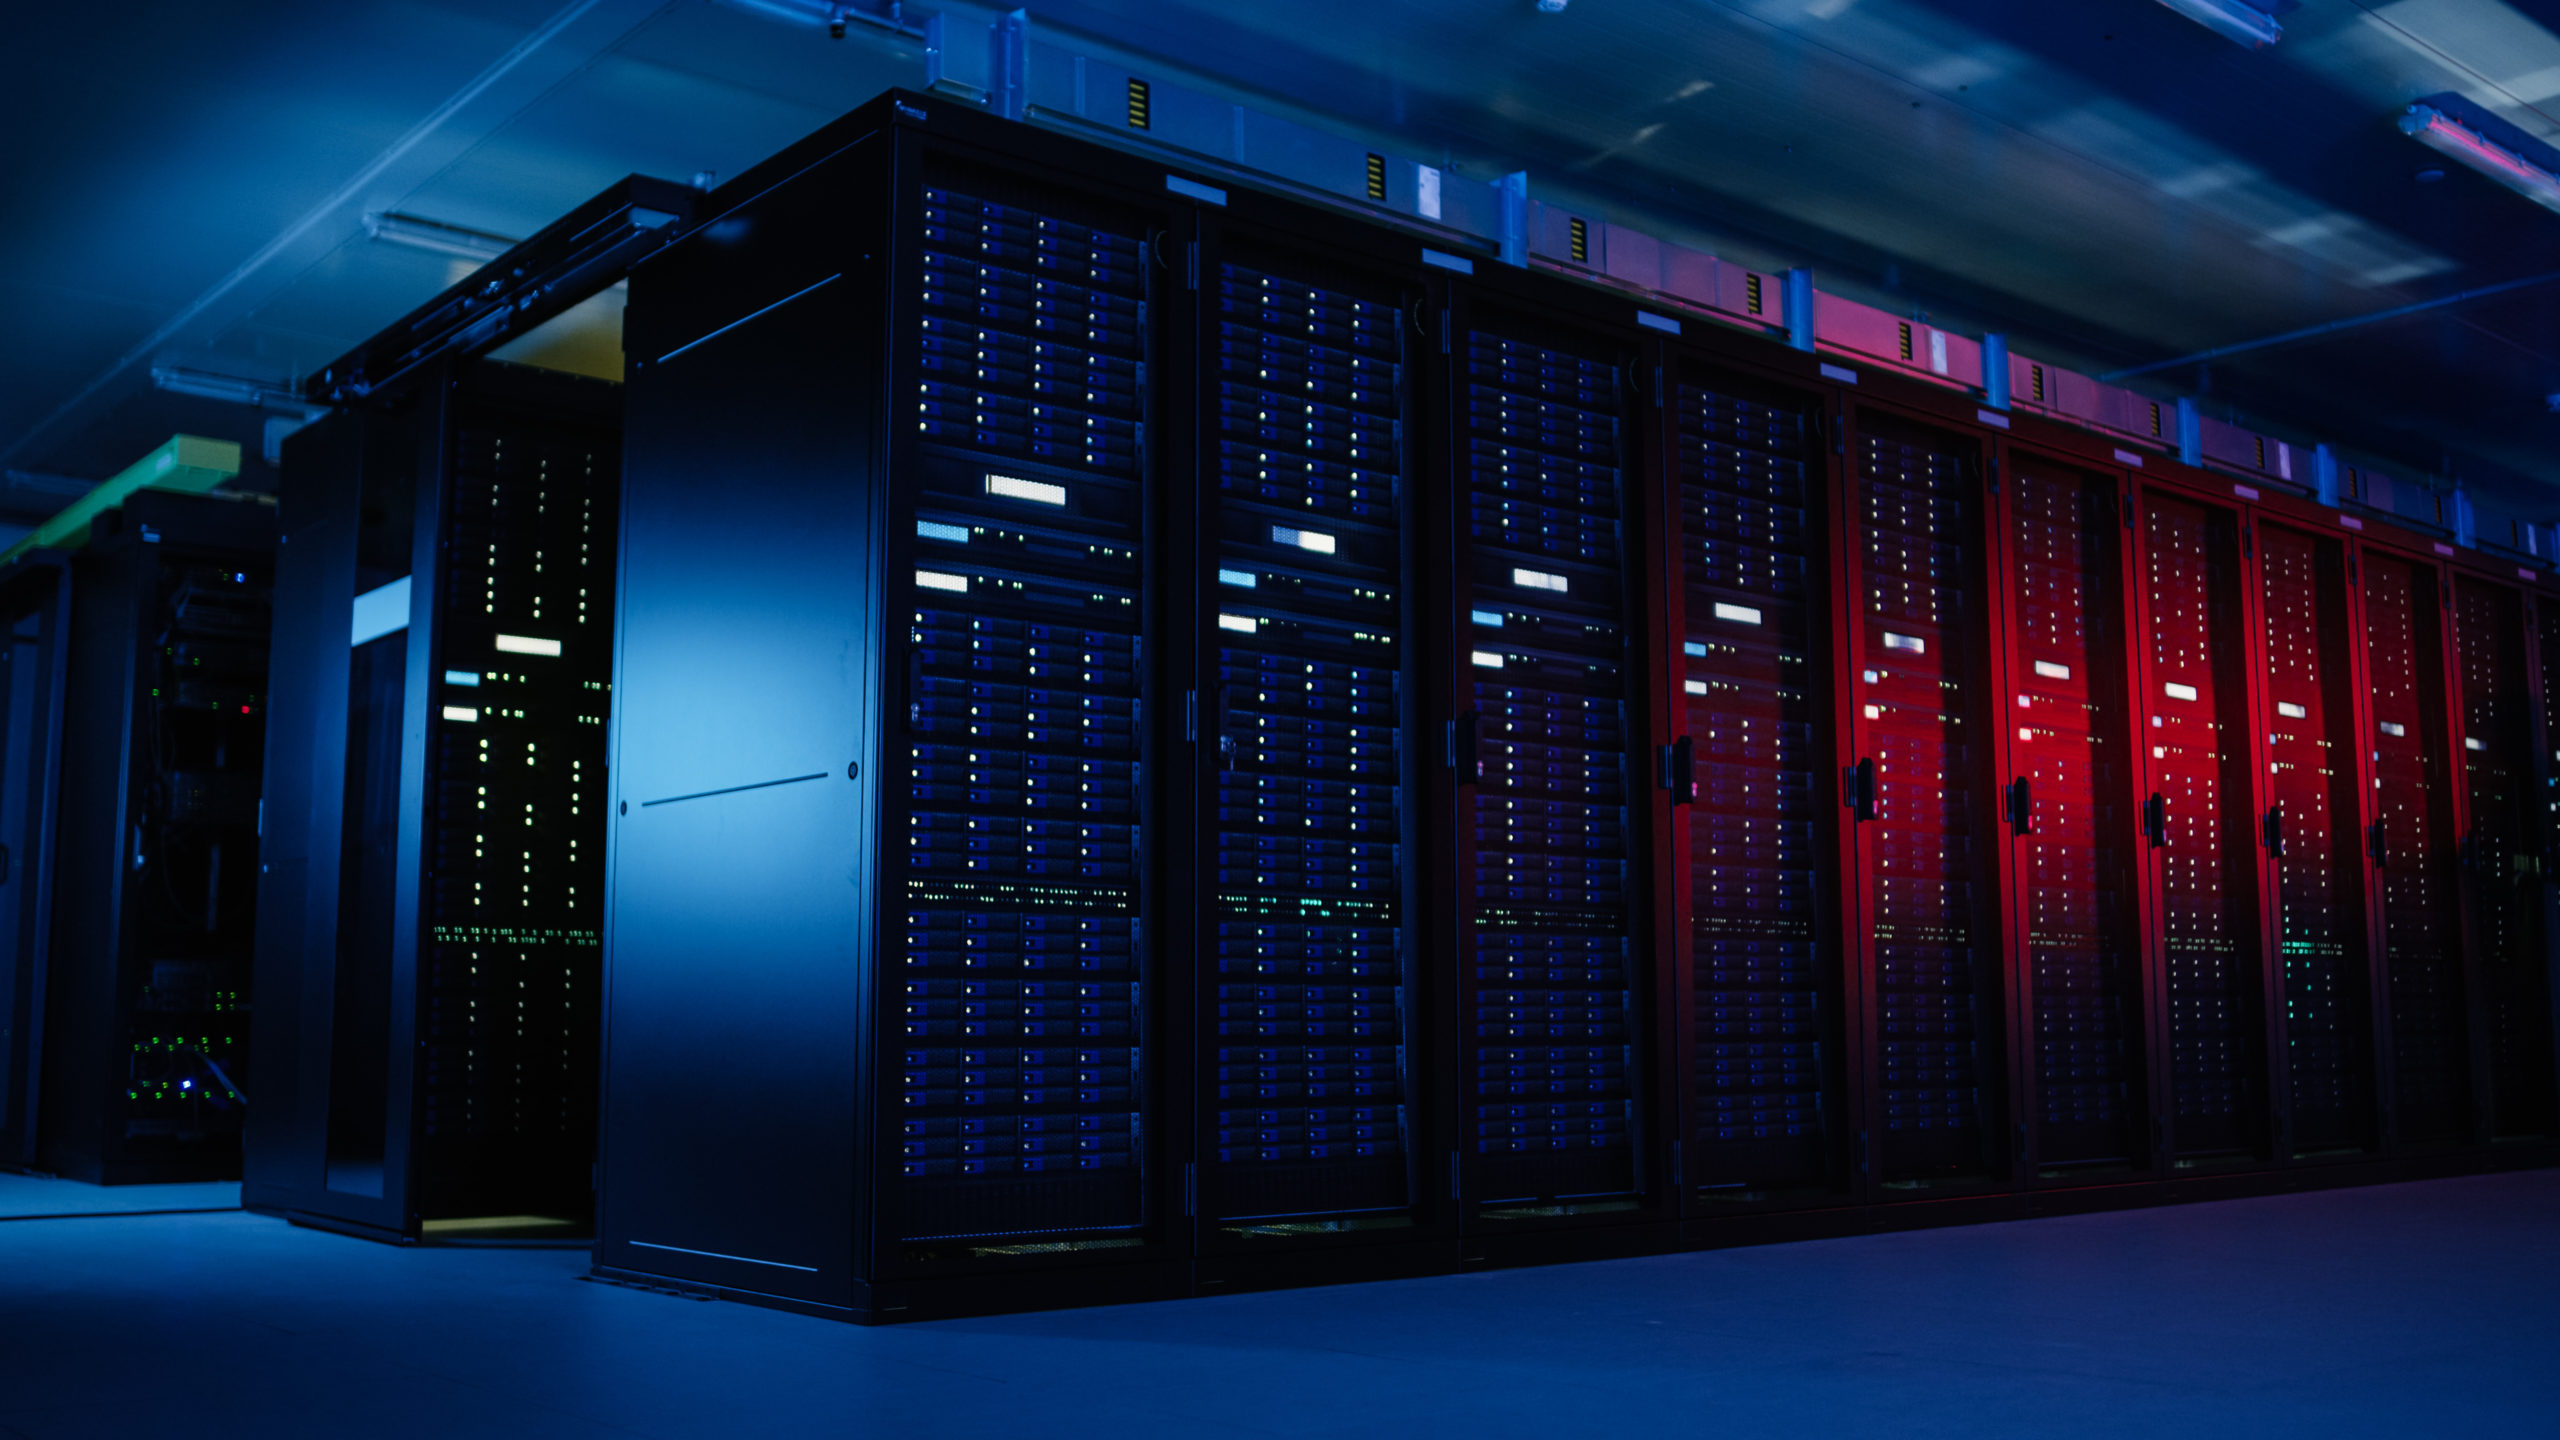  Rows of computer servers in dark room partly illuminated by red light illustrate concept of threat from ransomware attacks.